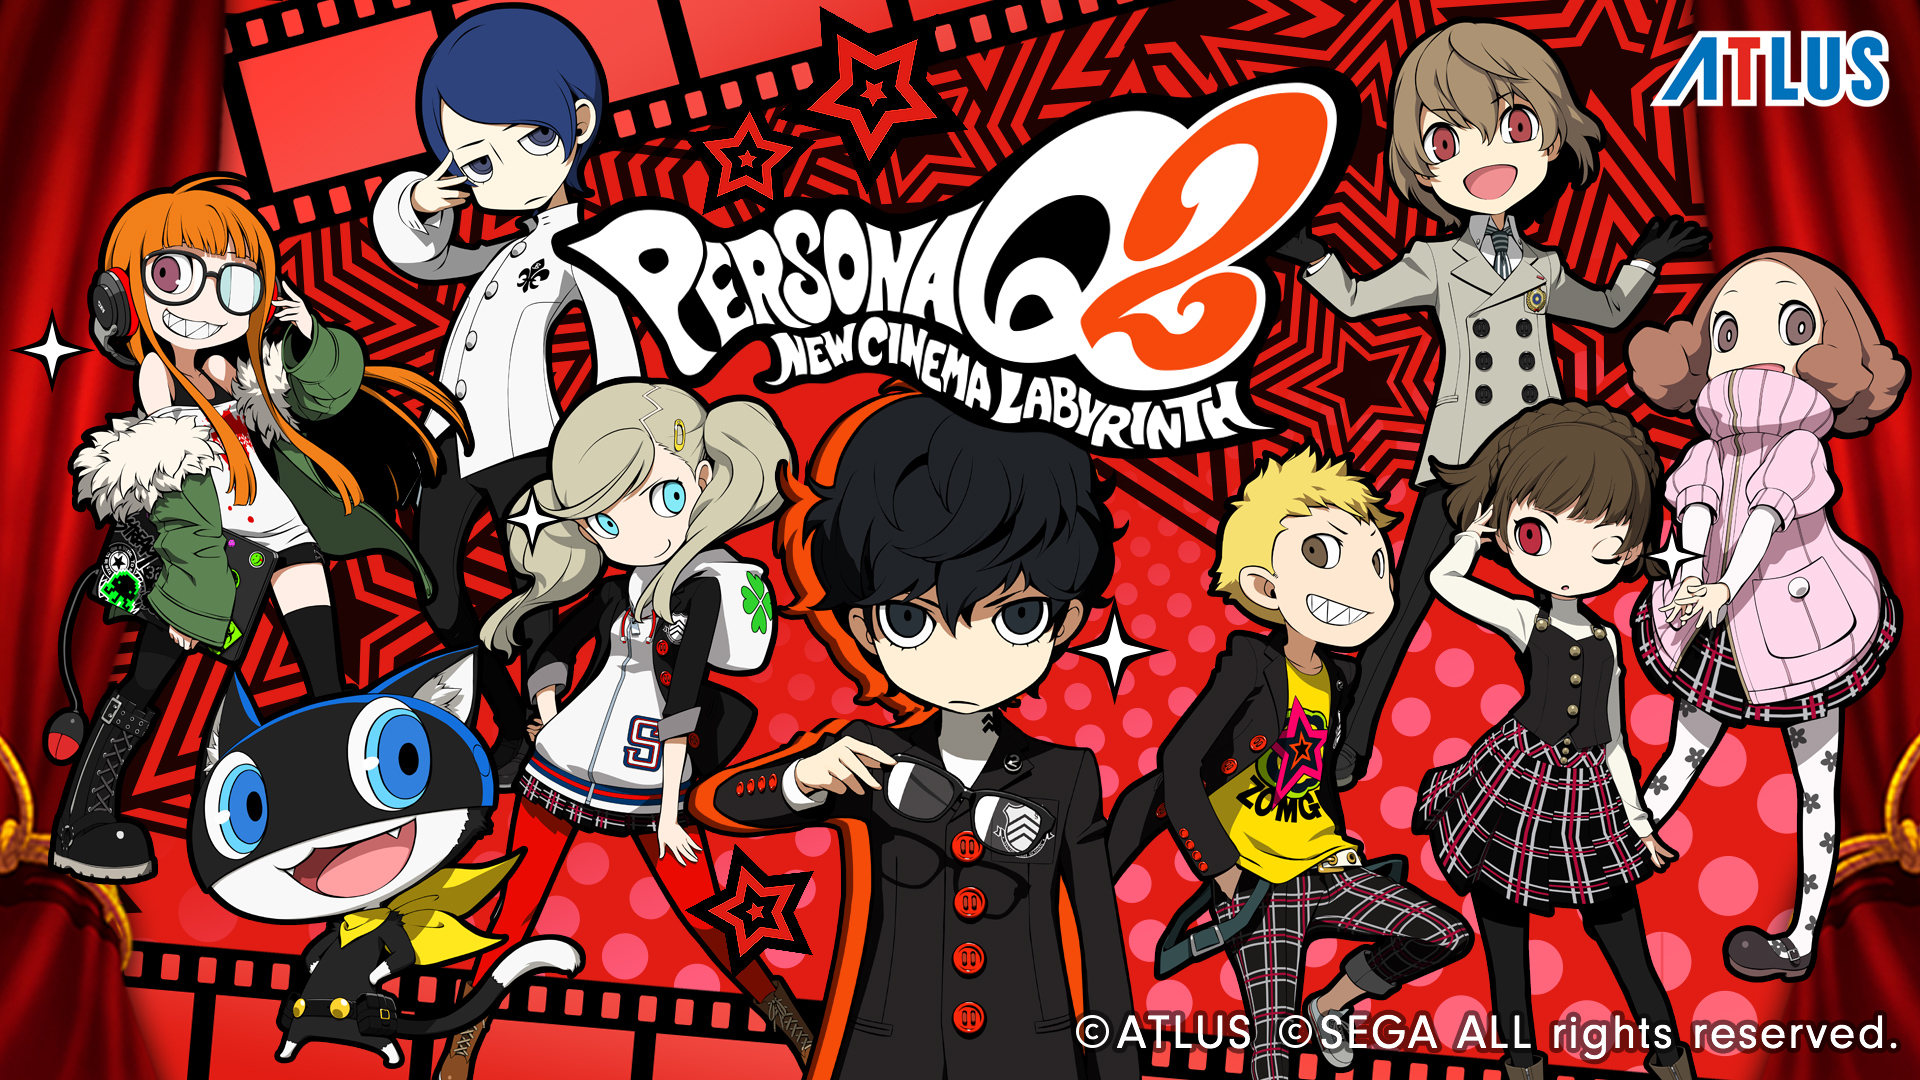 Video Game Persona Q 2 HD Wallpaper Background Image. 